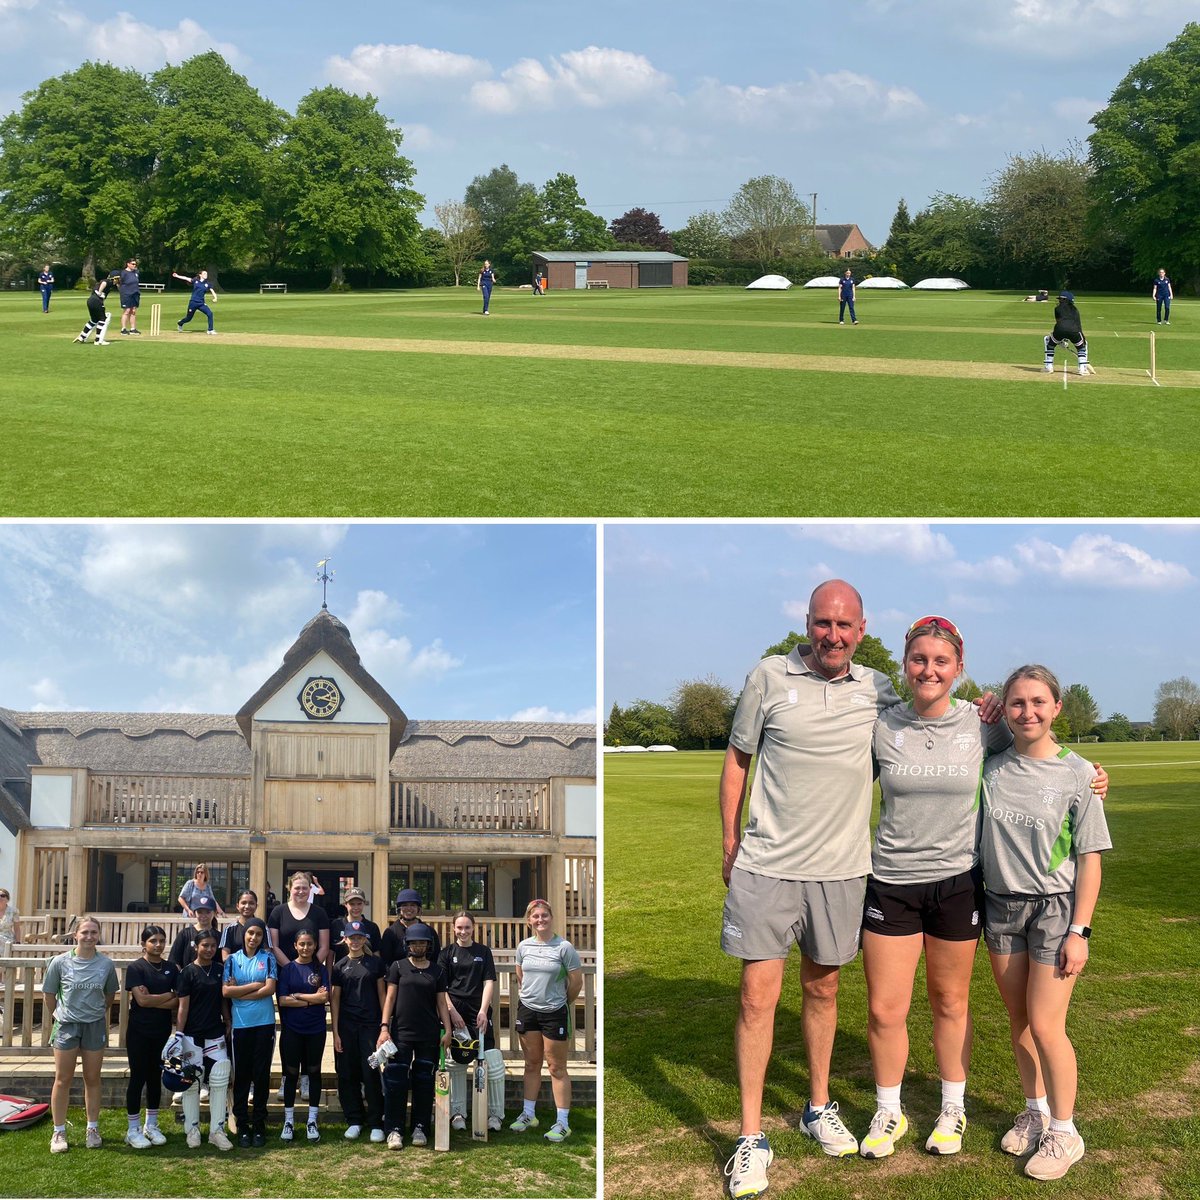 Two little bits oh history made today. Firstly for the @leicswomenccc U17 girls as they played their first competitive match against @uppinghamschool. The second is it’s the first time that girls have played on the 1st XI pitch at Uppingham (founded in 1584!). 

#GirlsCricket🏏